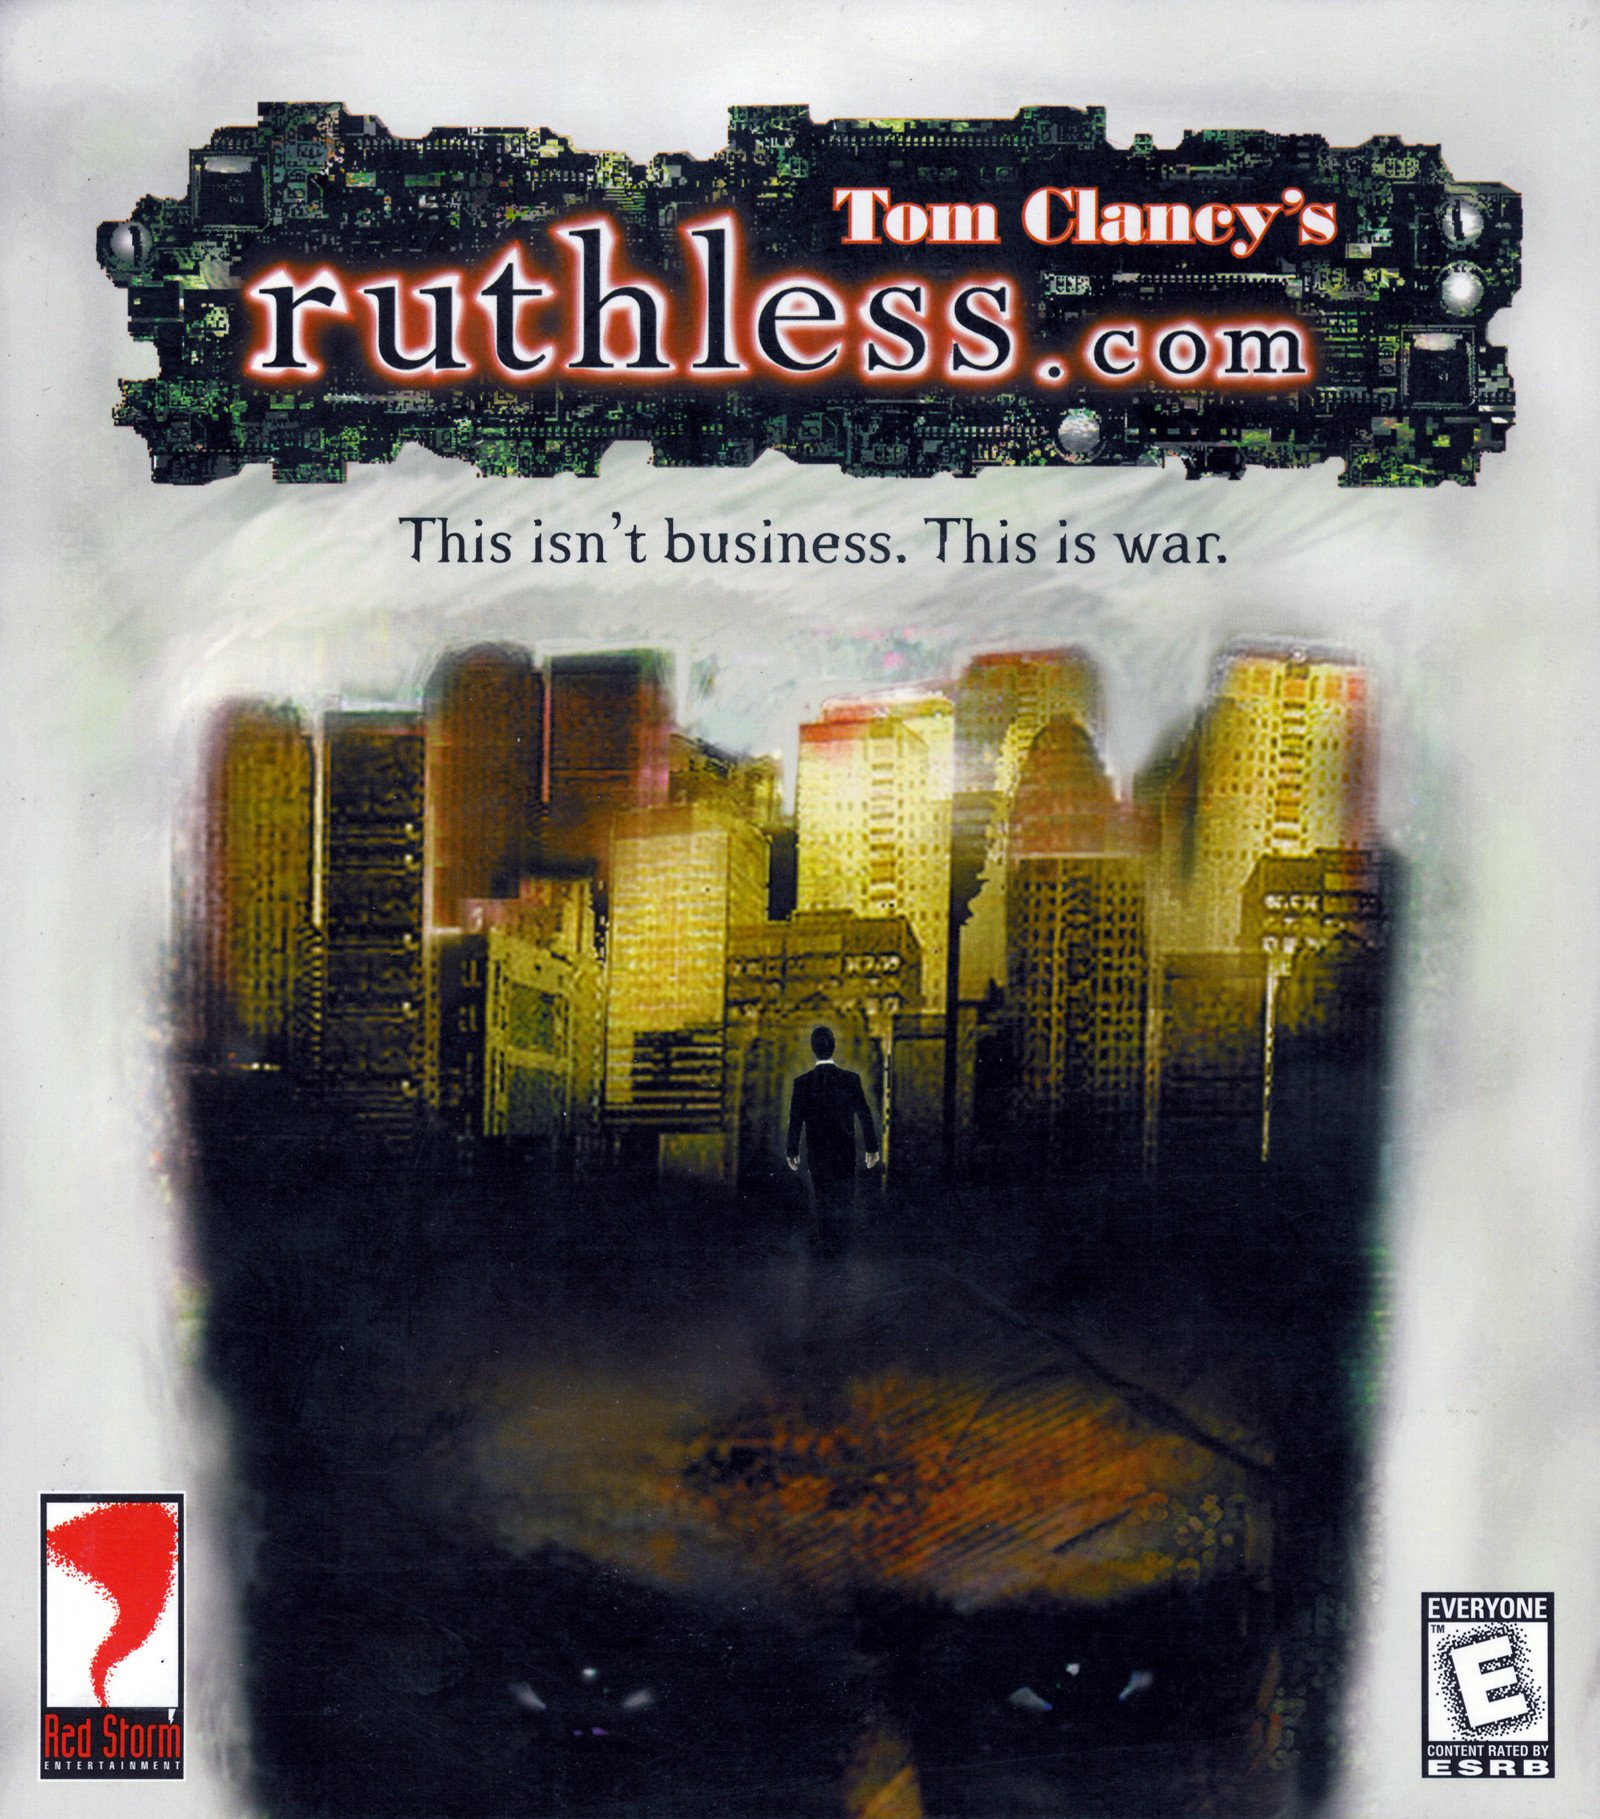 Image of Tom Clancy's ruthless.com